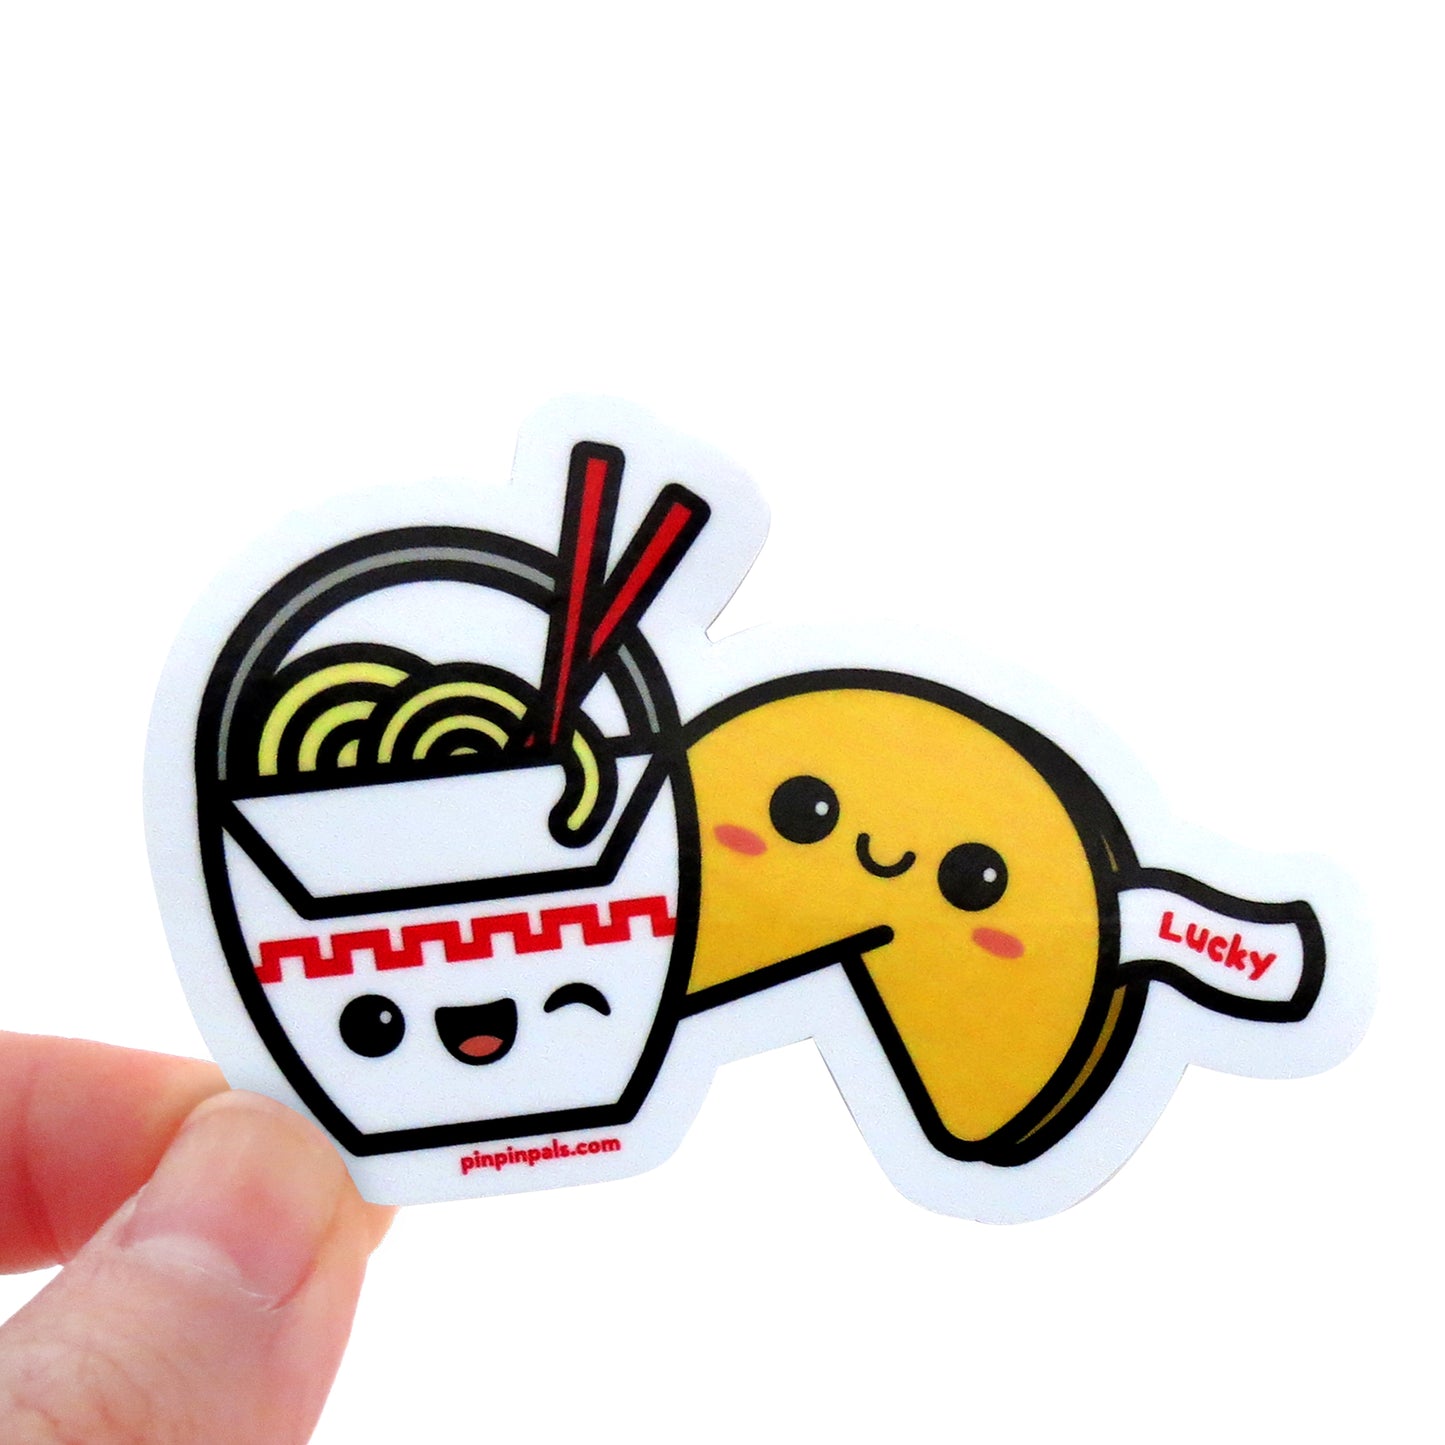 Hand holding a Chinese Takeout and Fortune Cookie vinyl sticker